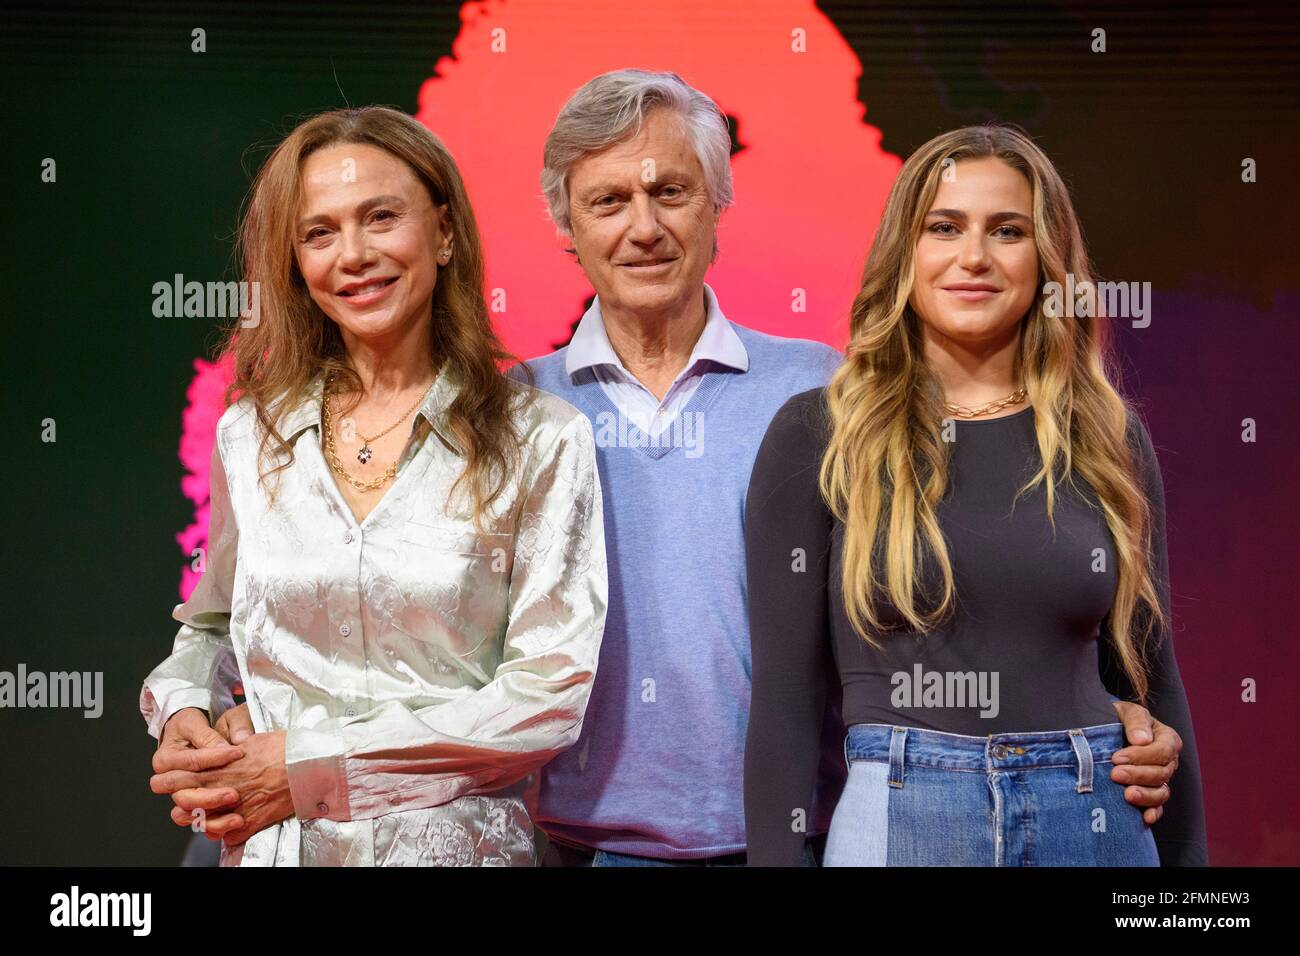 Lena Olin, Lasse Hallstrom and daughter Tora Hallstrom present their new film project about the Swedish artist Hilma af Klint in Stockholm, Sweden, on May 10, 2021. Photo: Henrik Montgomery / TT code 10060 Stock Photo